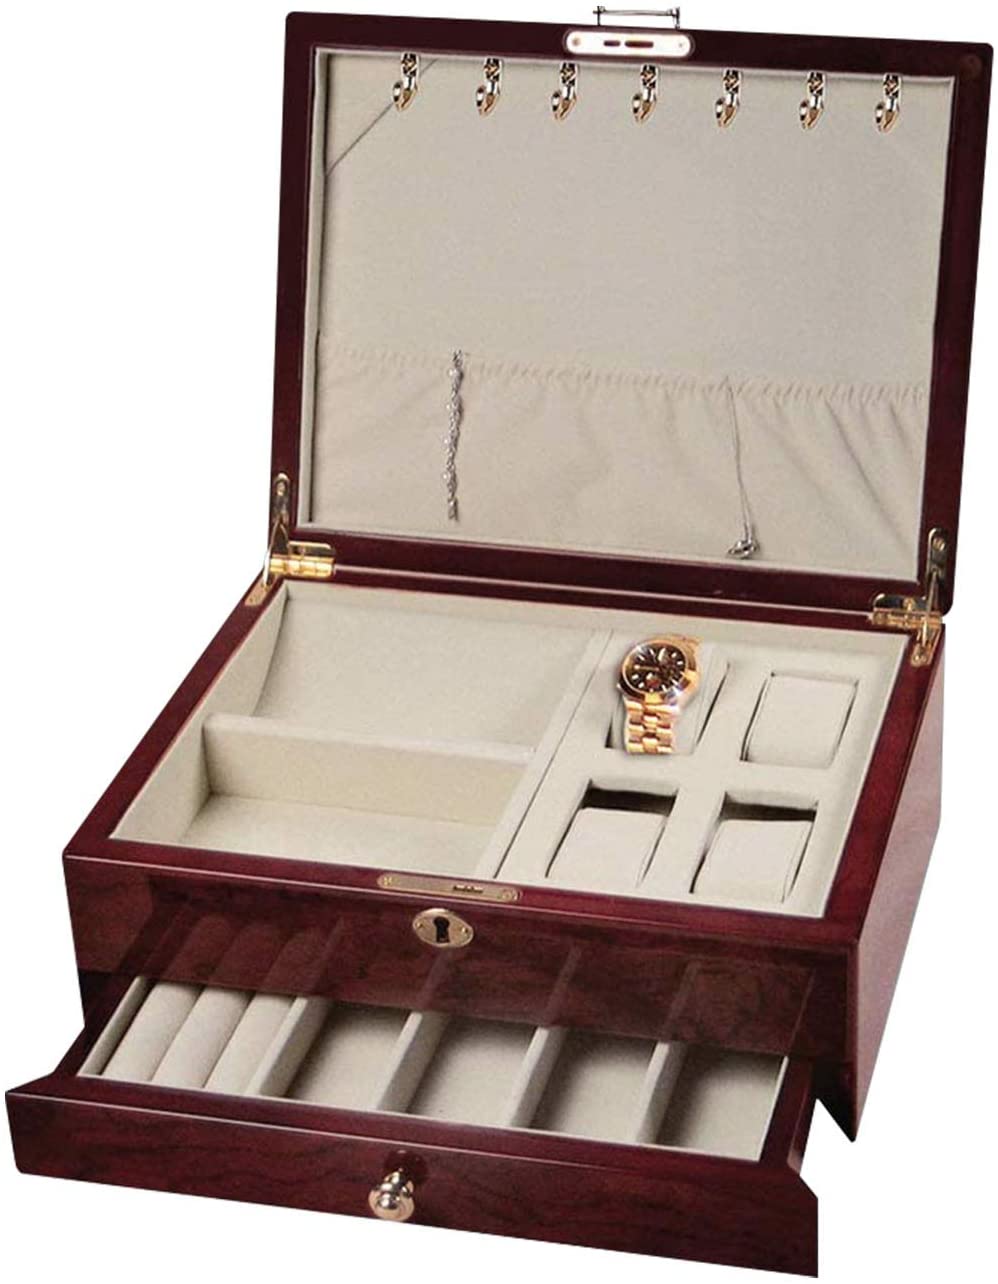 Luxury italian jewelry boxes - Handcrafted jewelry boxes - Made in